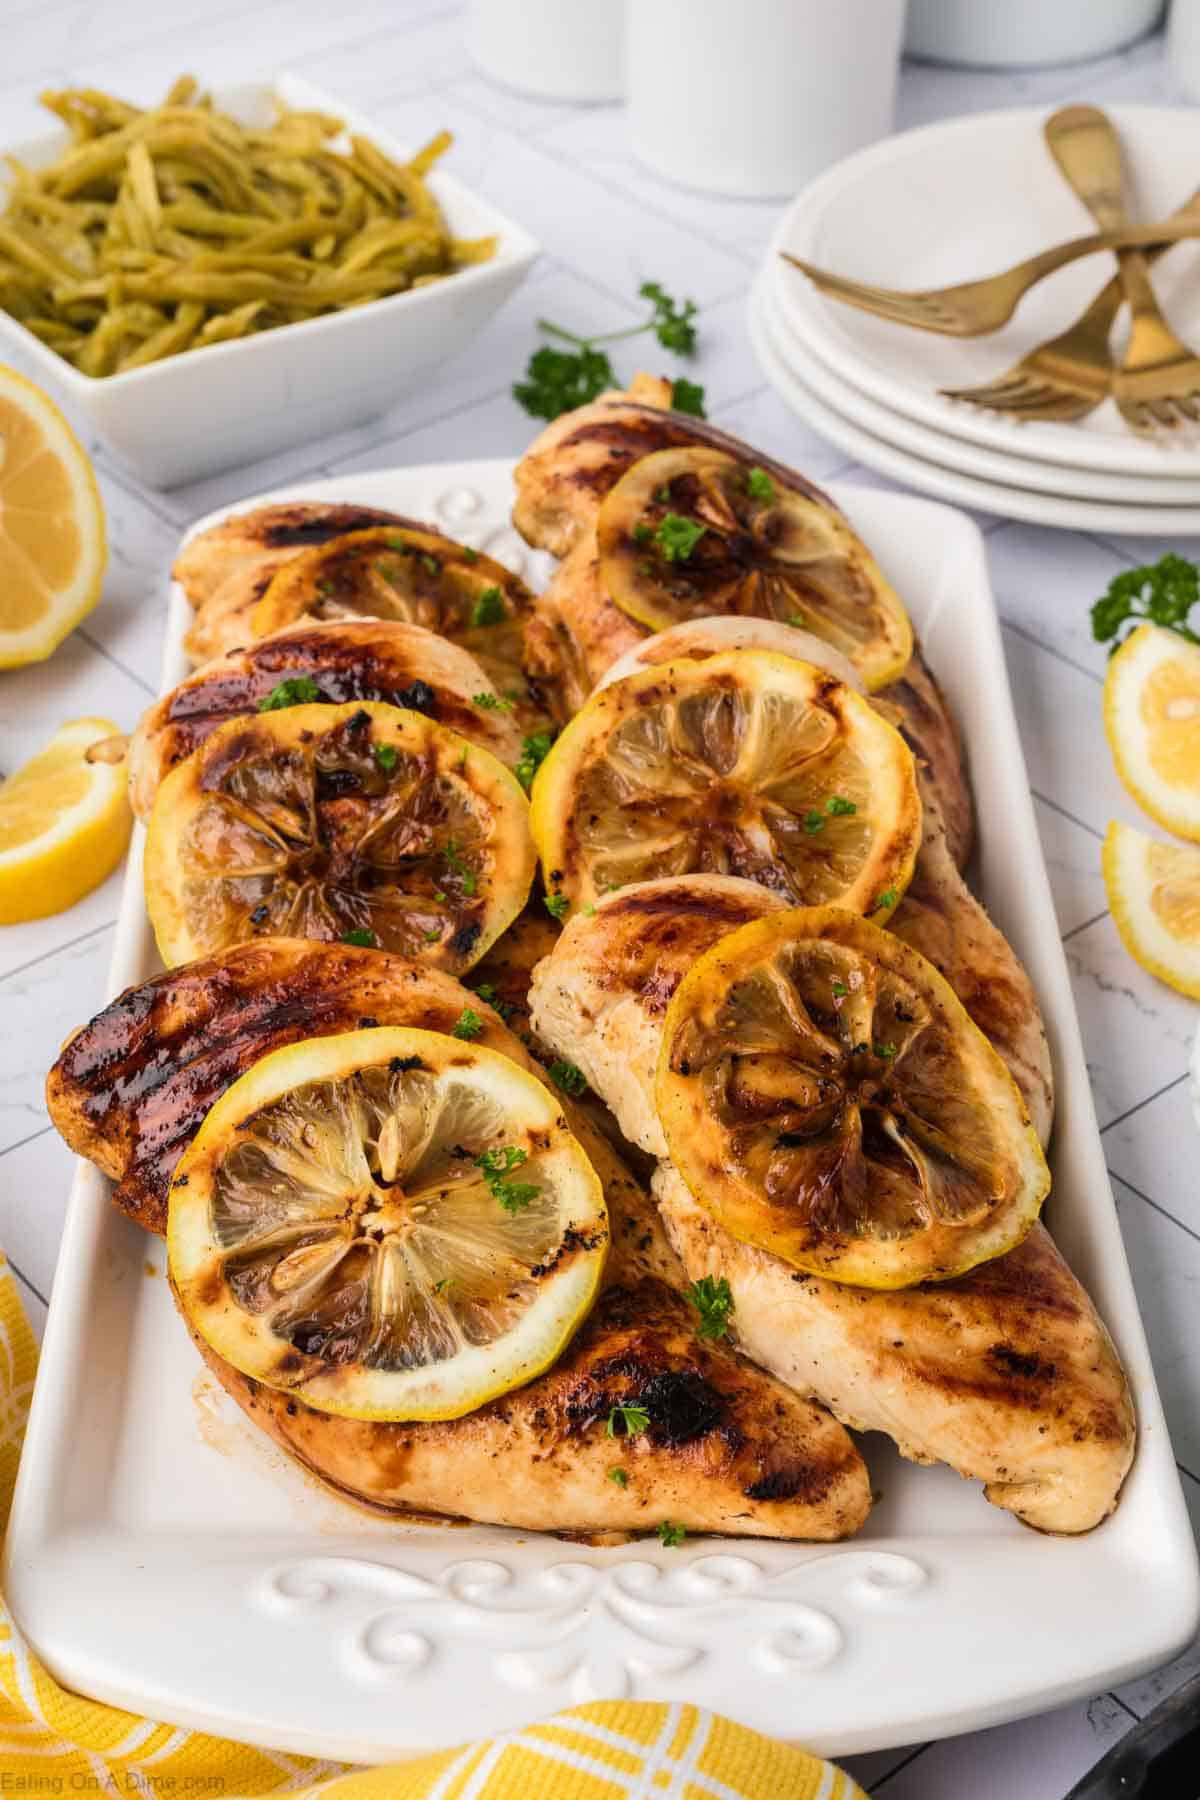 Chicken breast on a platter topped with slice lemons